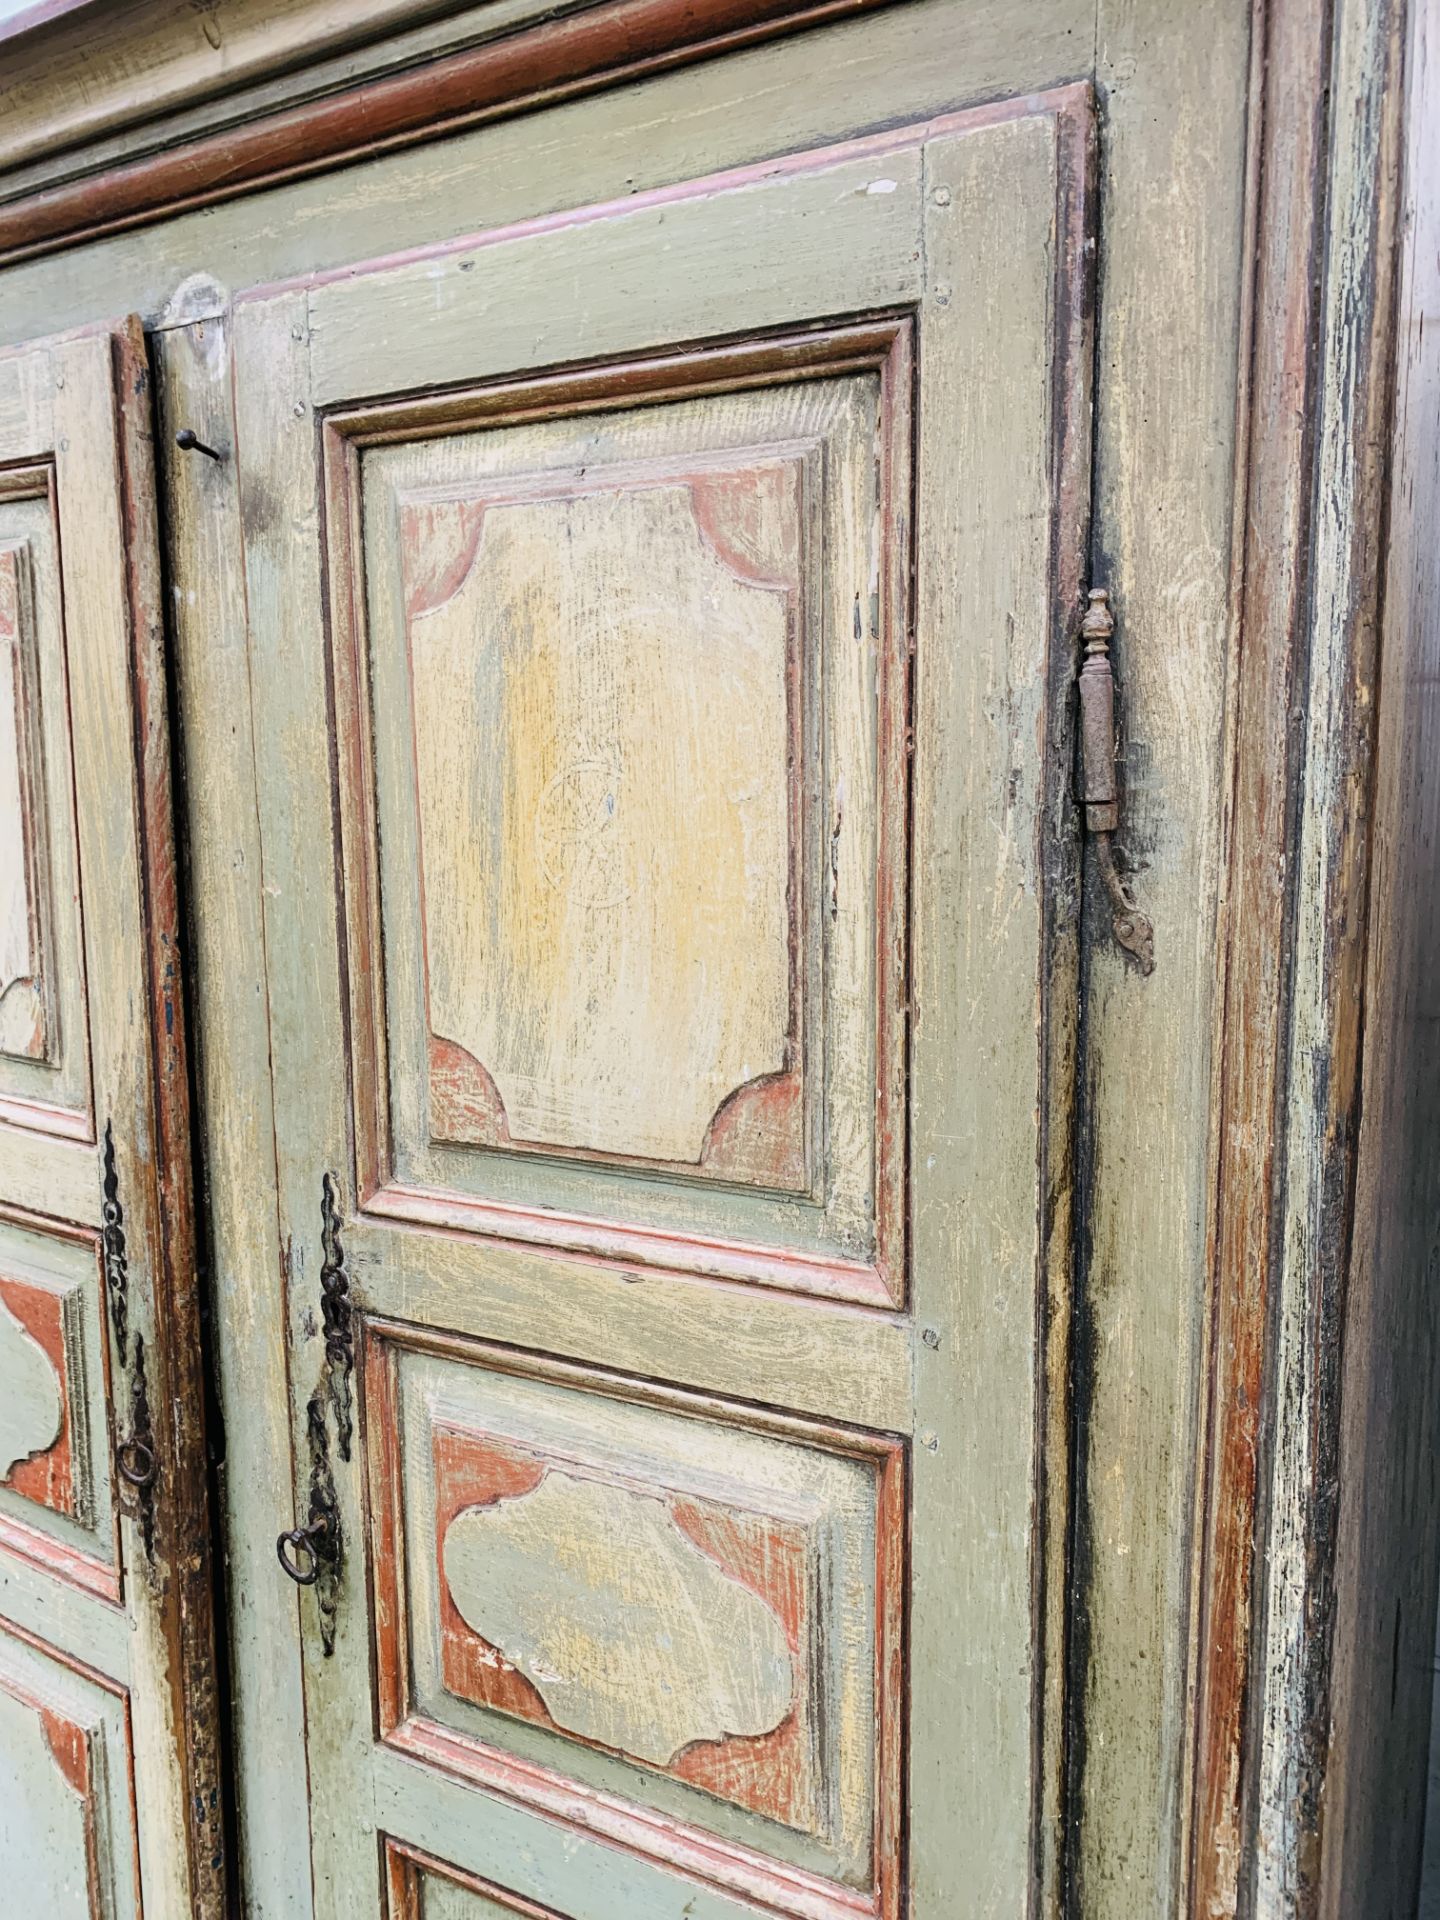 Mid-19th century French painted pine wardrobe - Image 7 of 8